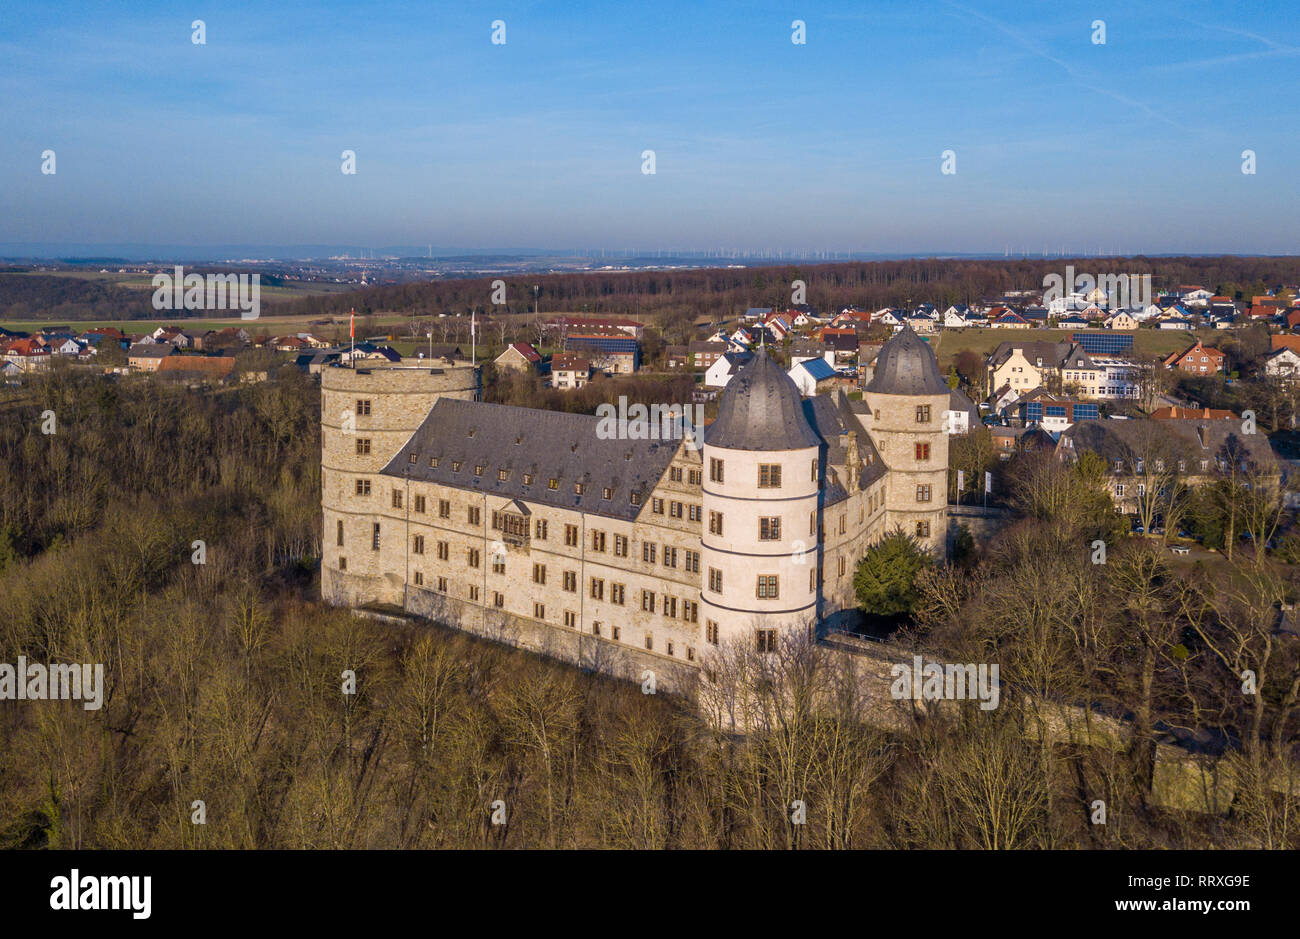 Aerial view of the Renaissance Wewelsburg castle famous as the central SS and Heinrich Himmler cult-site, Germany Stock Photo